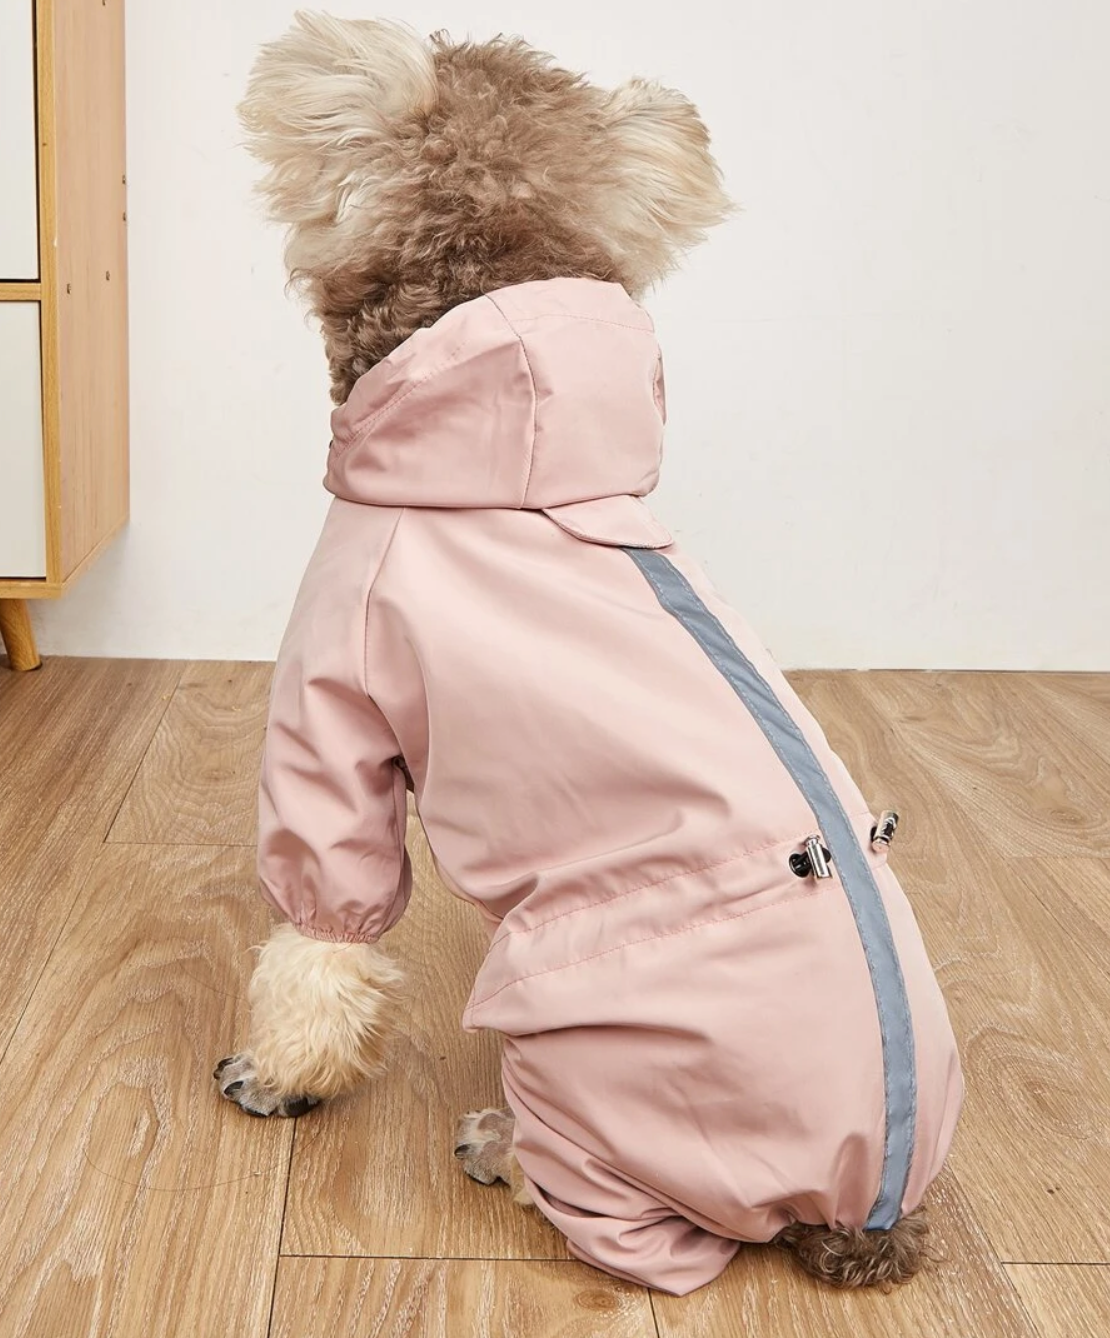 Pink Dog Lightweight, Waterproof Raincoat Jacket with Reflective Safety Detail